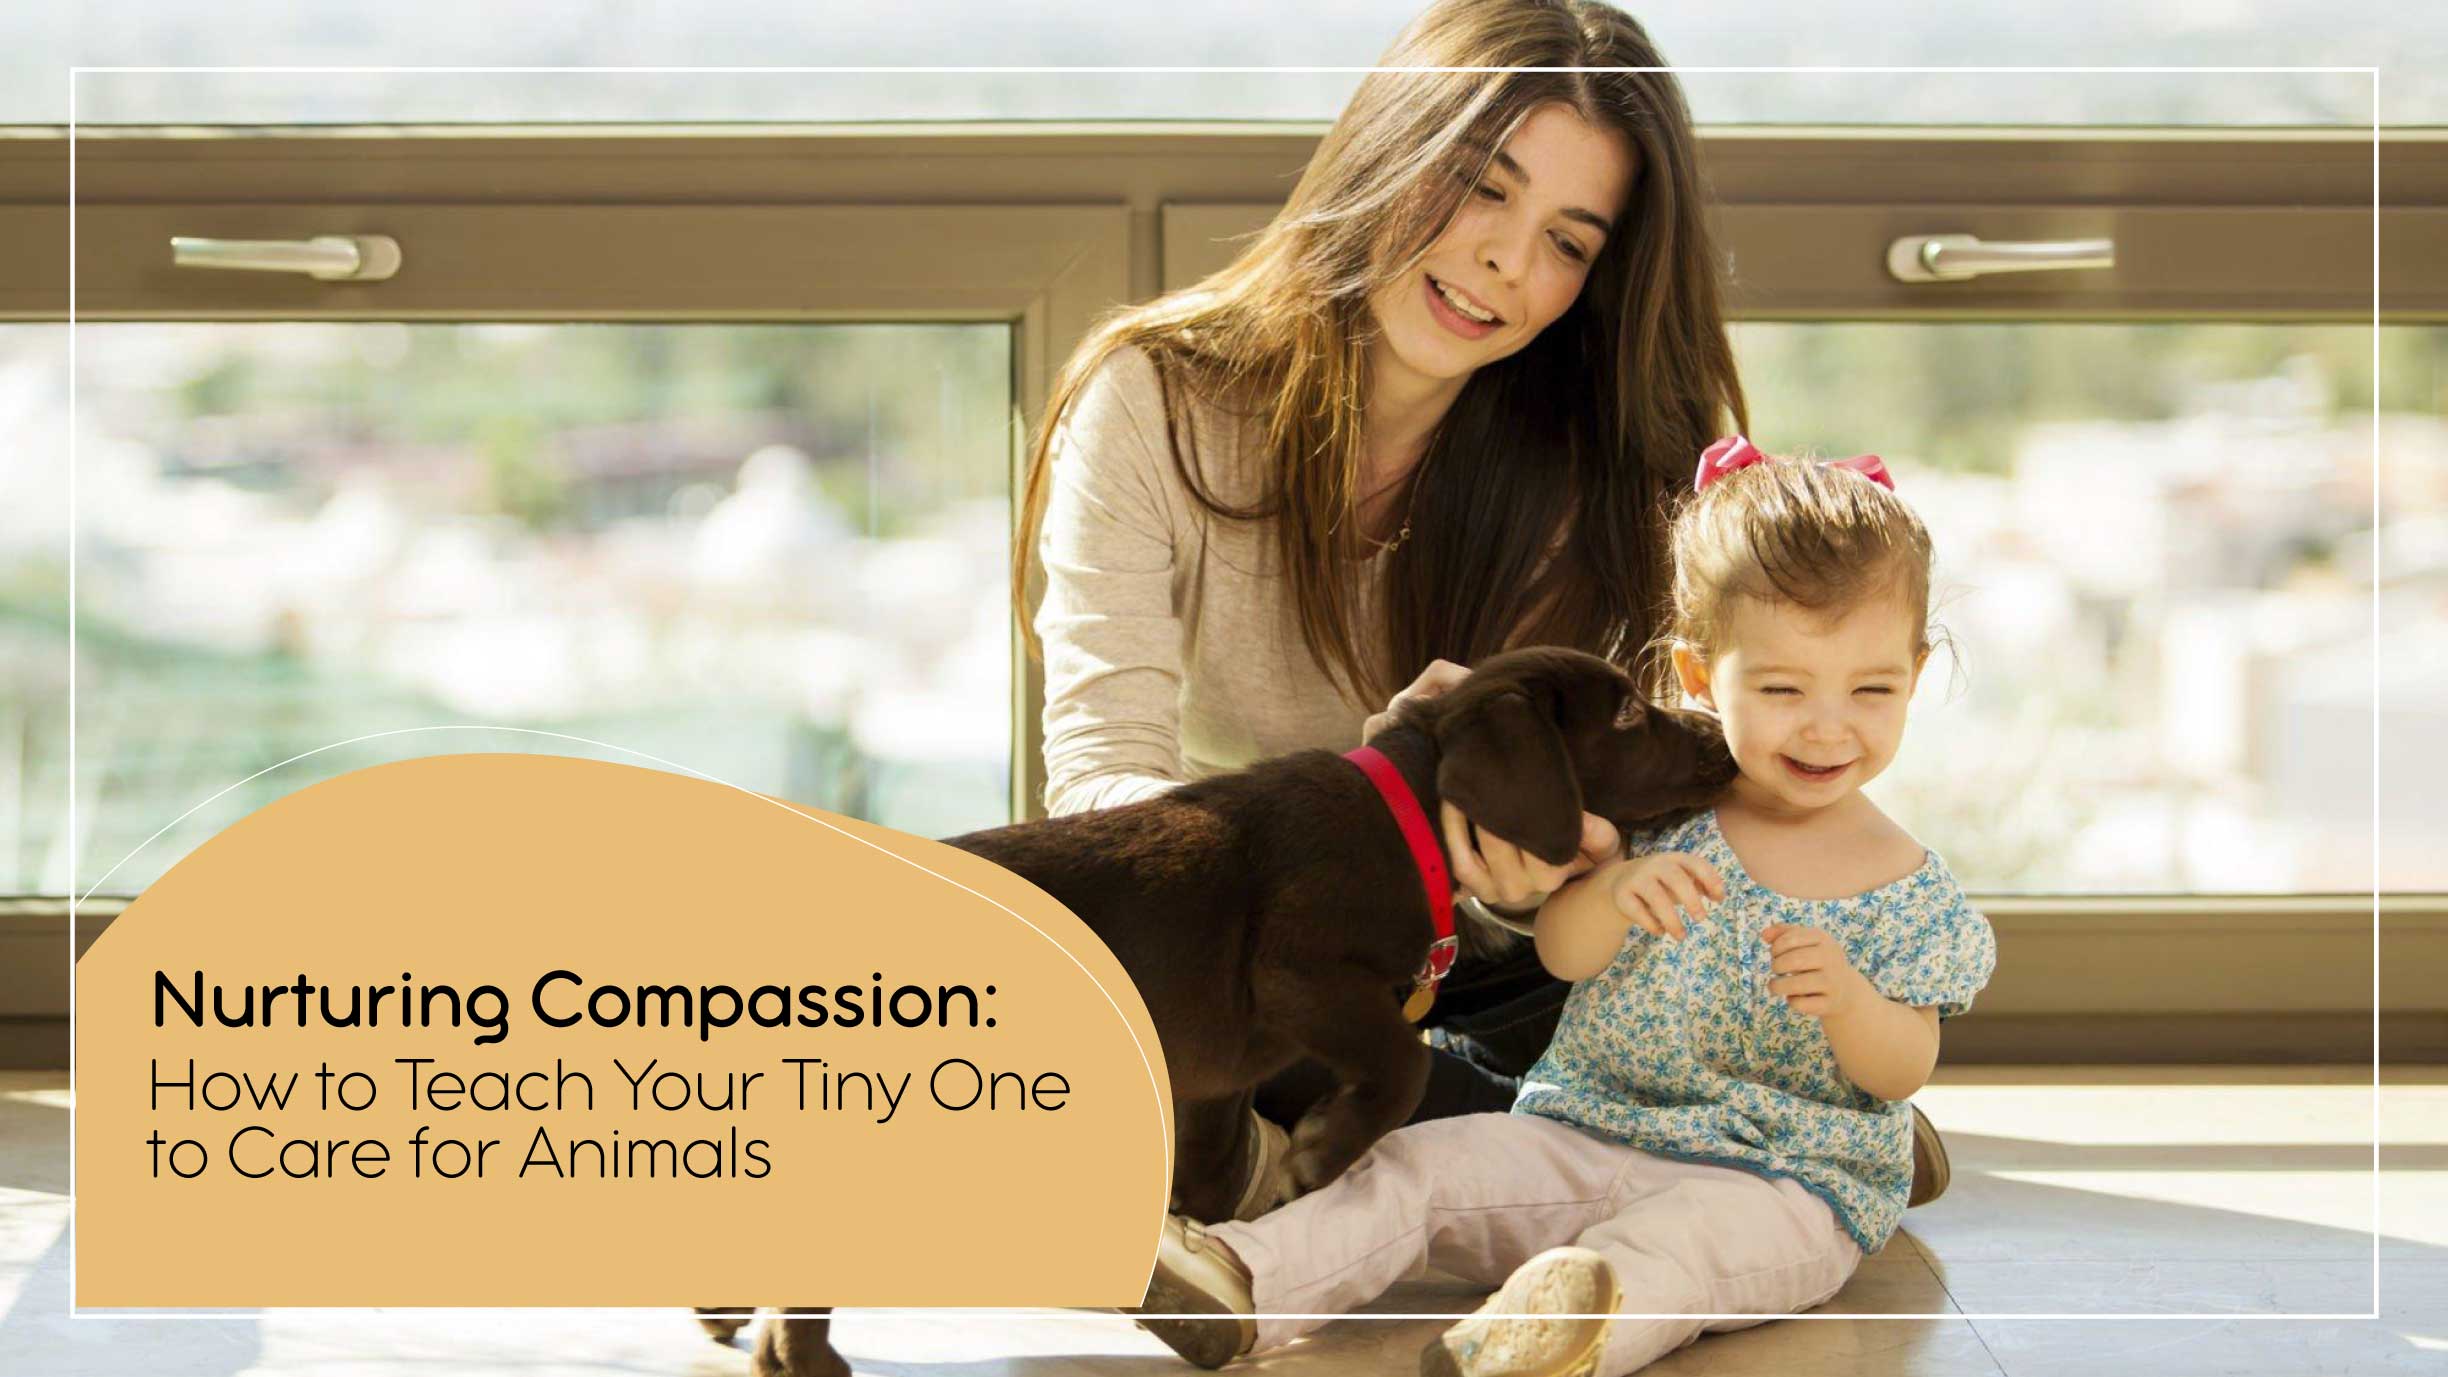 Nurturing Compassion: How to Teach Your Tiny One to Care for Animals